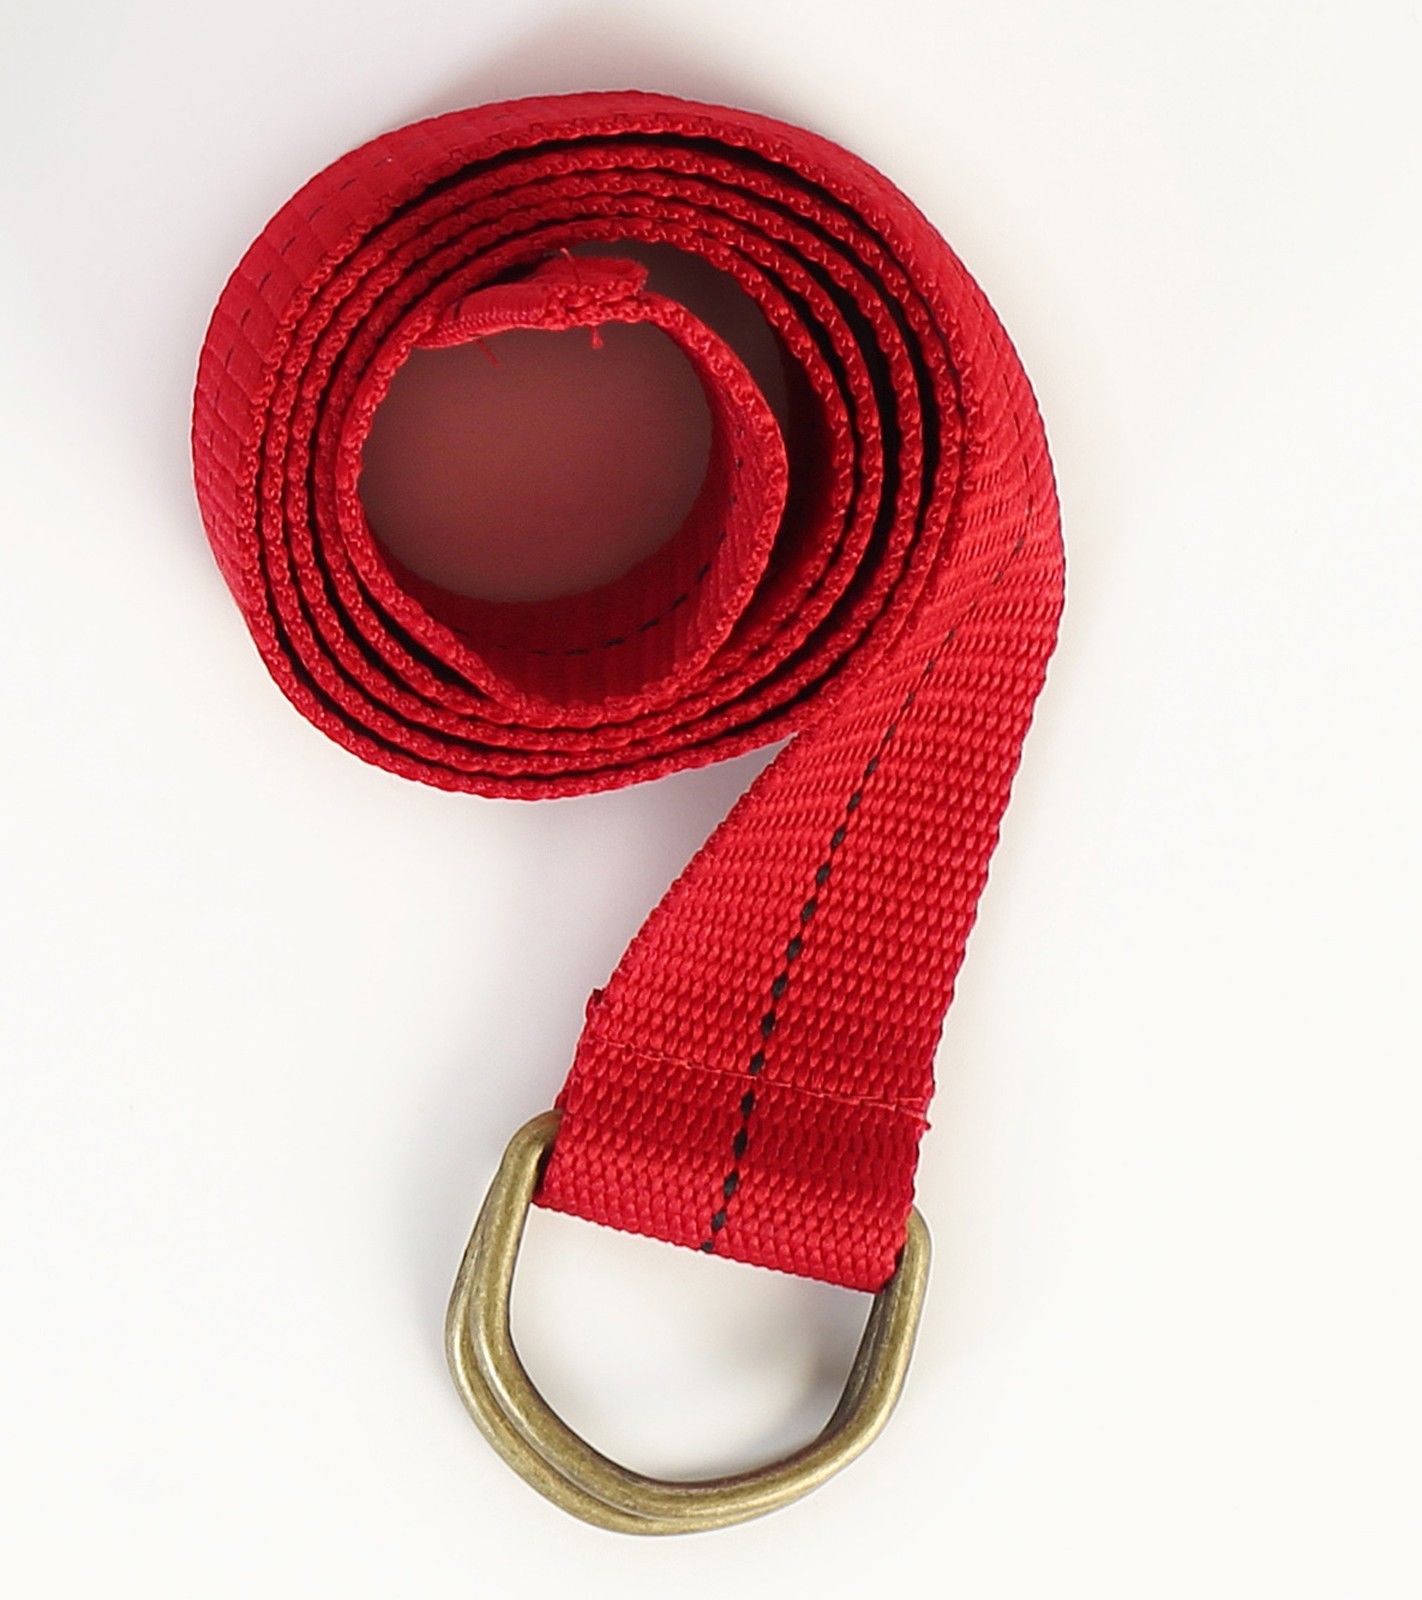 Military Canvas Web Belt Double D-ring Buckle